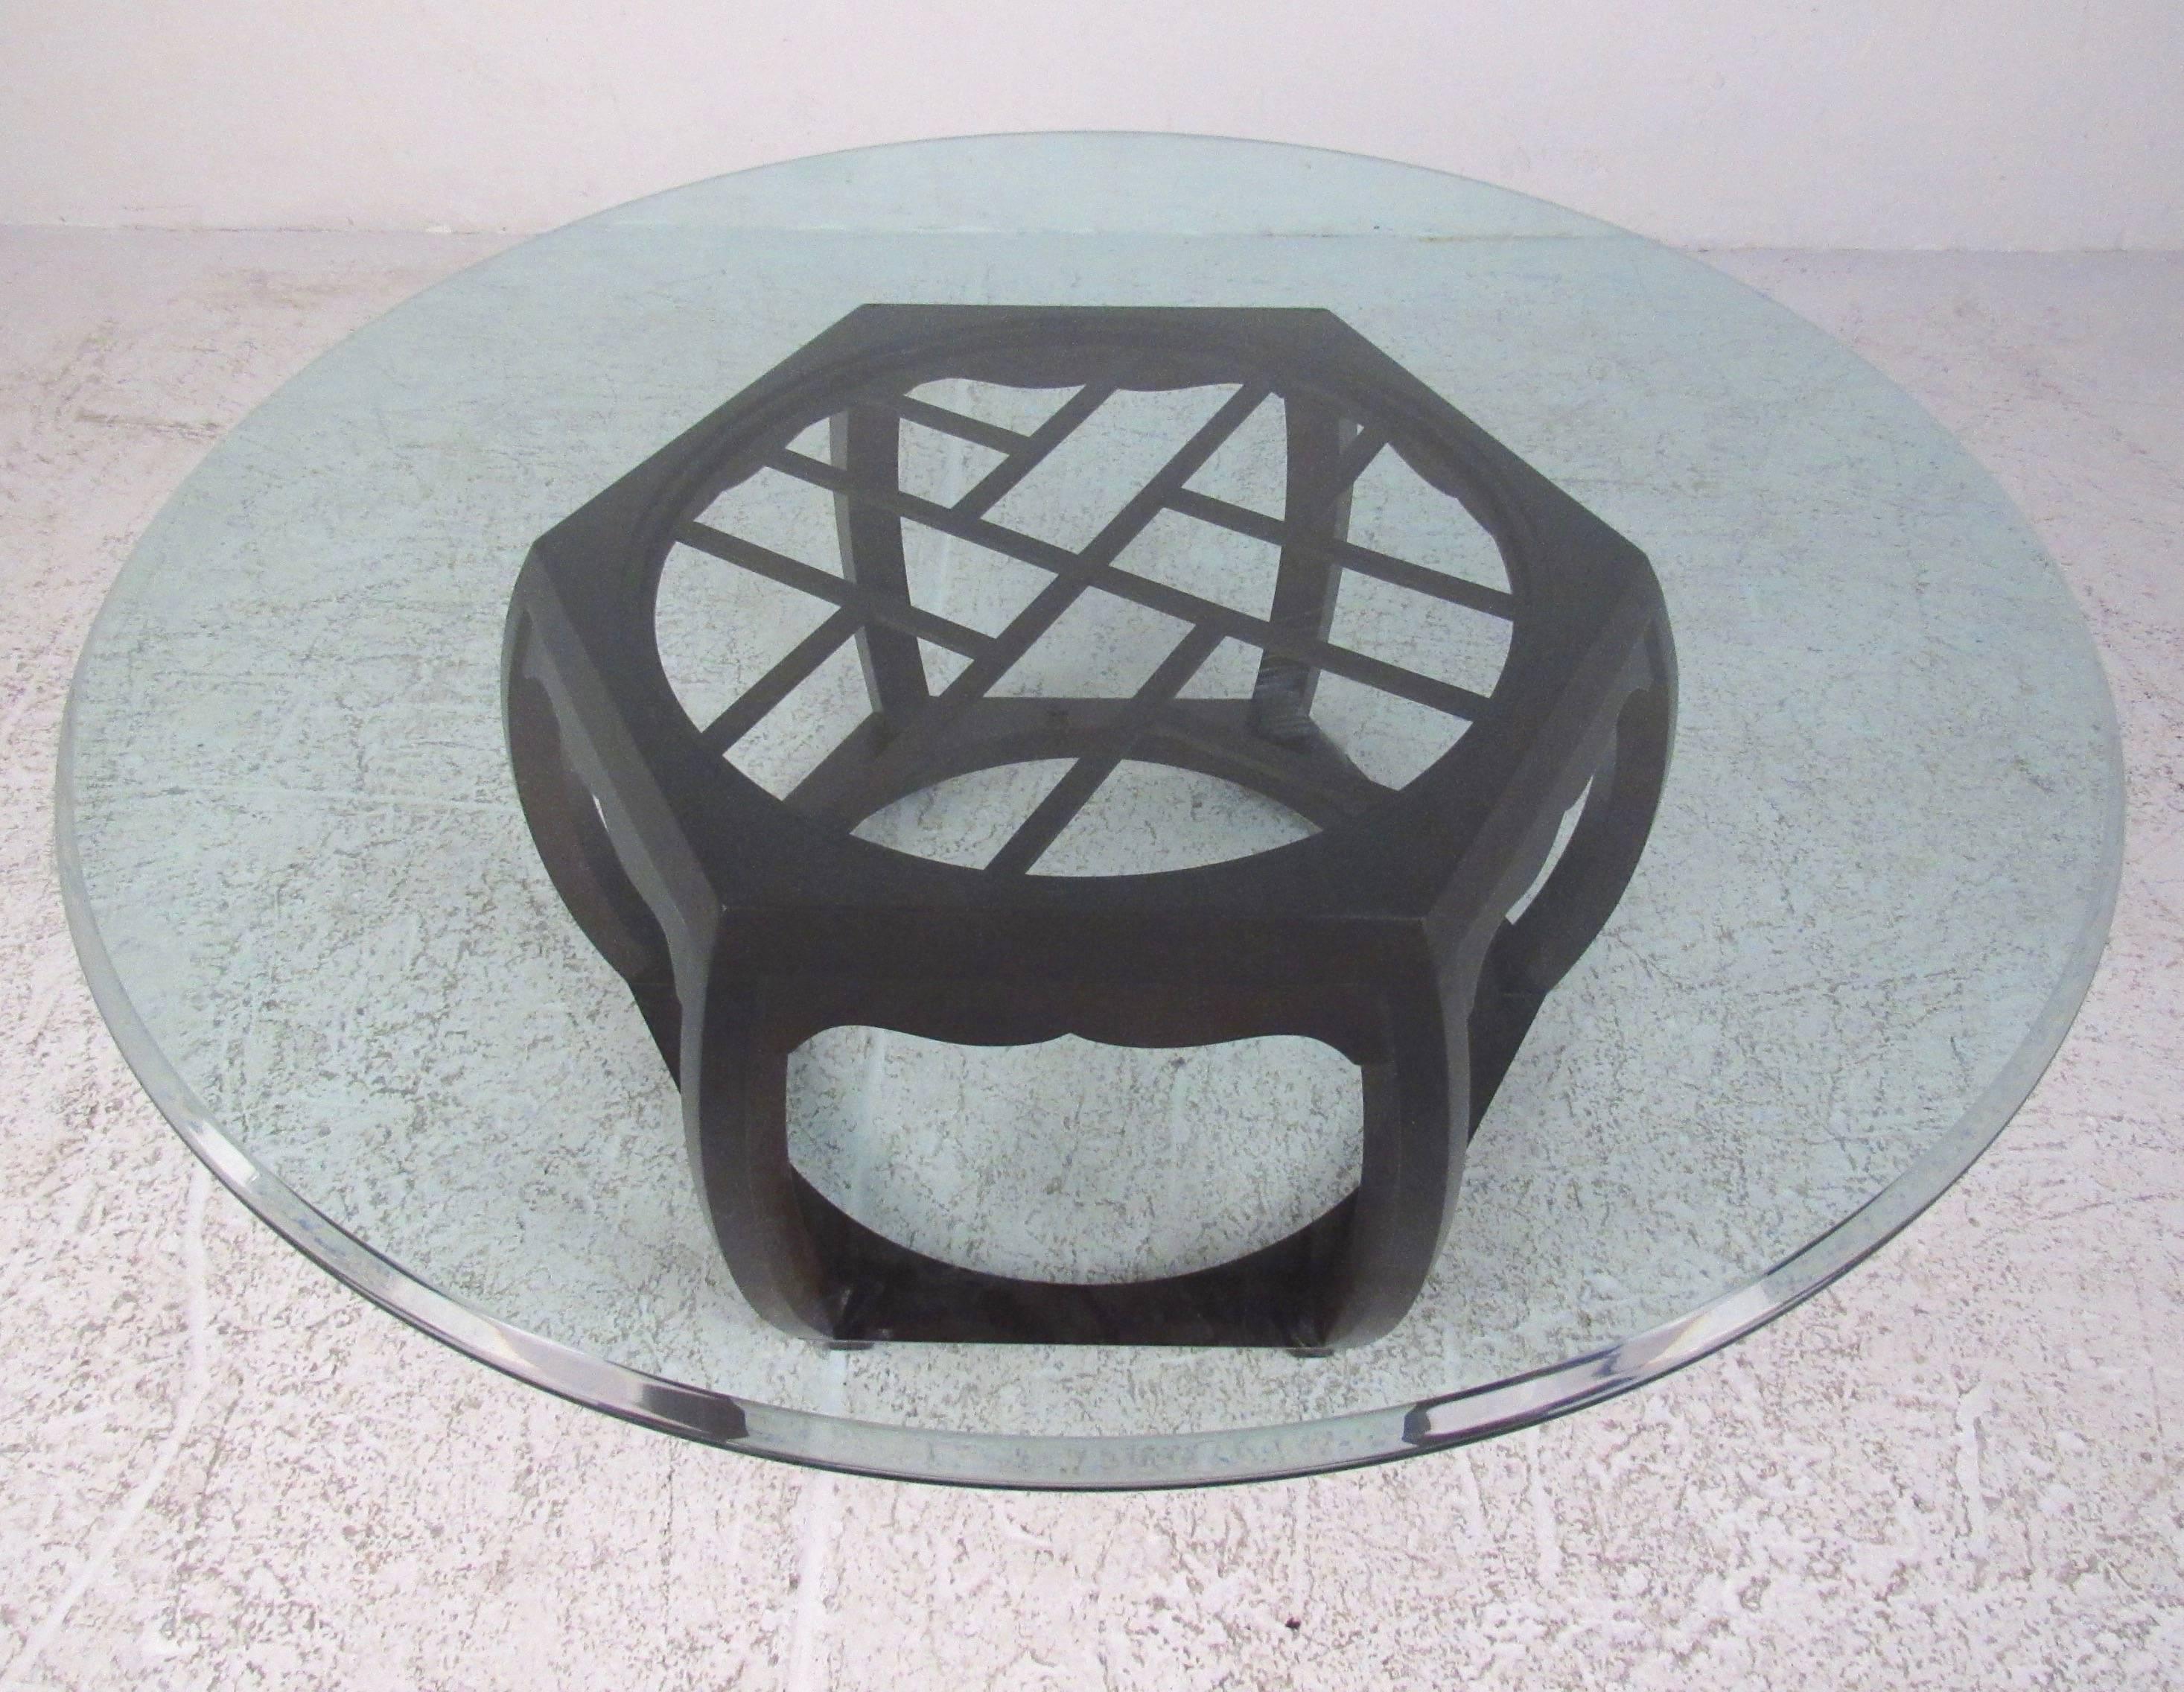 This contemporary modern sculptural wood base features unique design and large bevelled glass top. Ideal circular coffee table for home or business living room or waiting room. Please confirm item location (NY or NJ). 

Base dimensions: 29 W, 29 D,